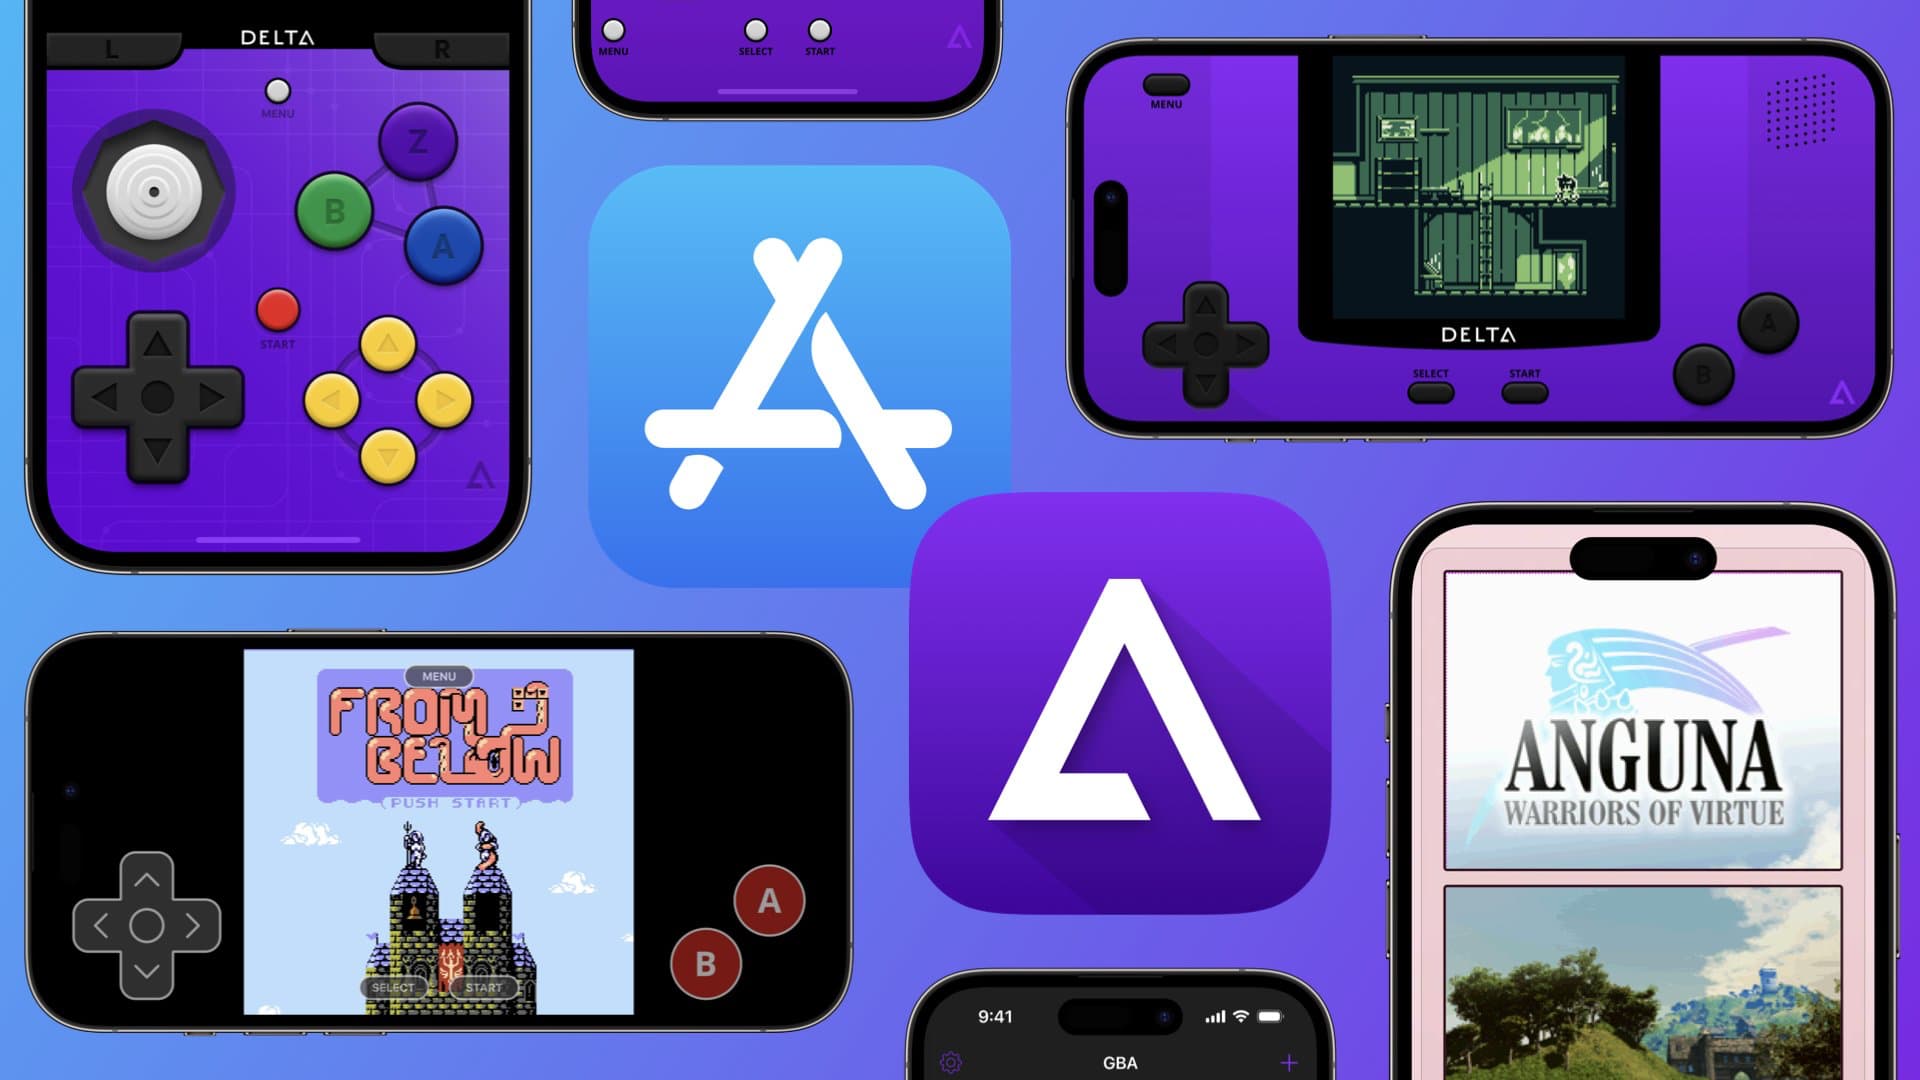 Delta emulator app officially available in the iOS App Store